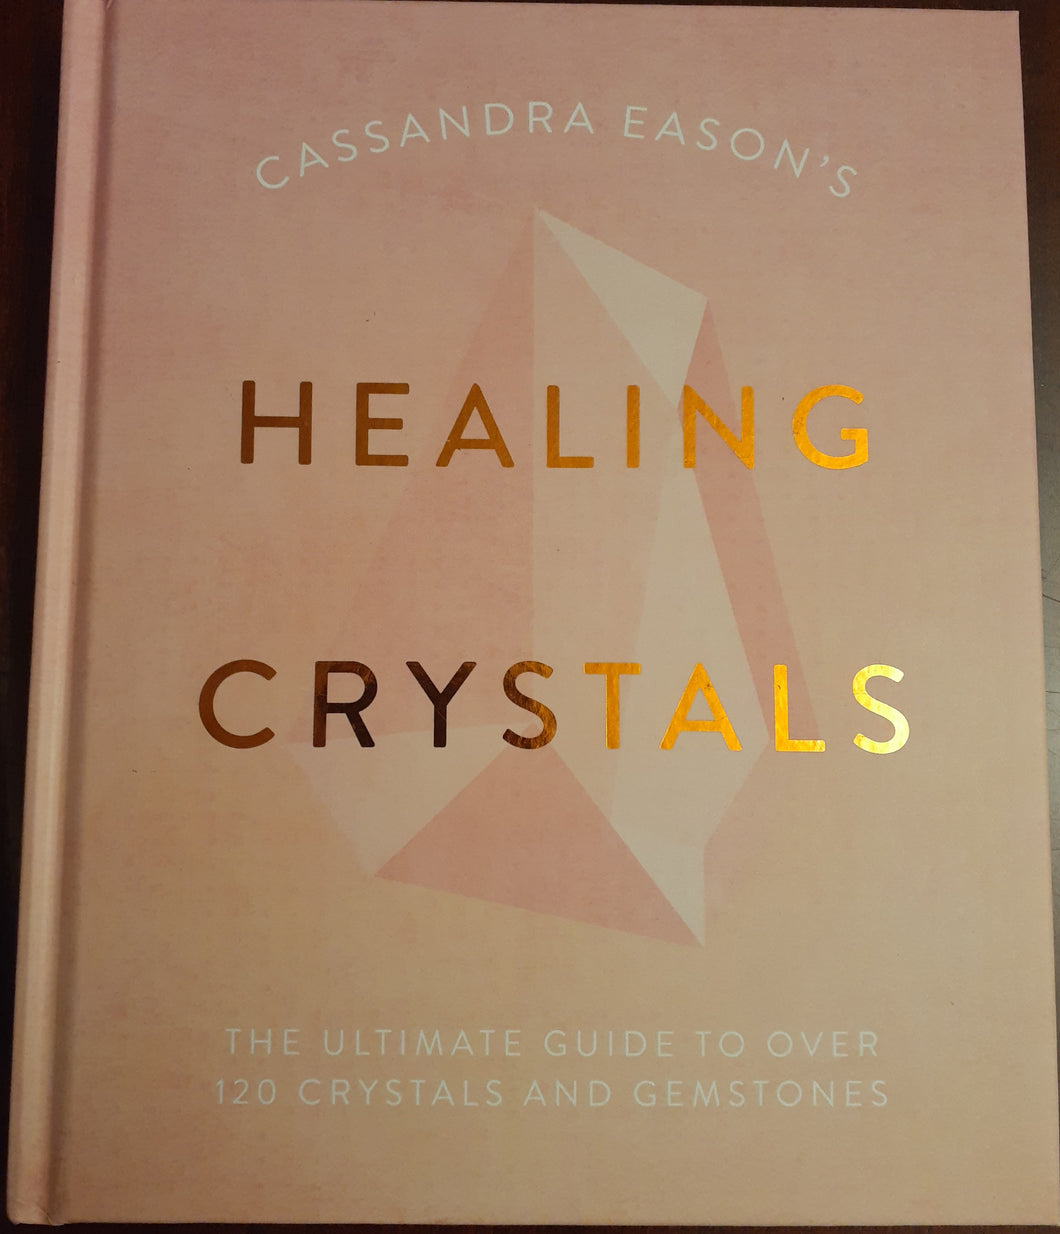 Cassandra Eason's Healing Crystals: The Ultimate Guide to Over 120 Crystals and Gemstones